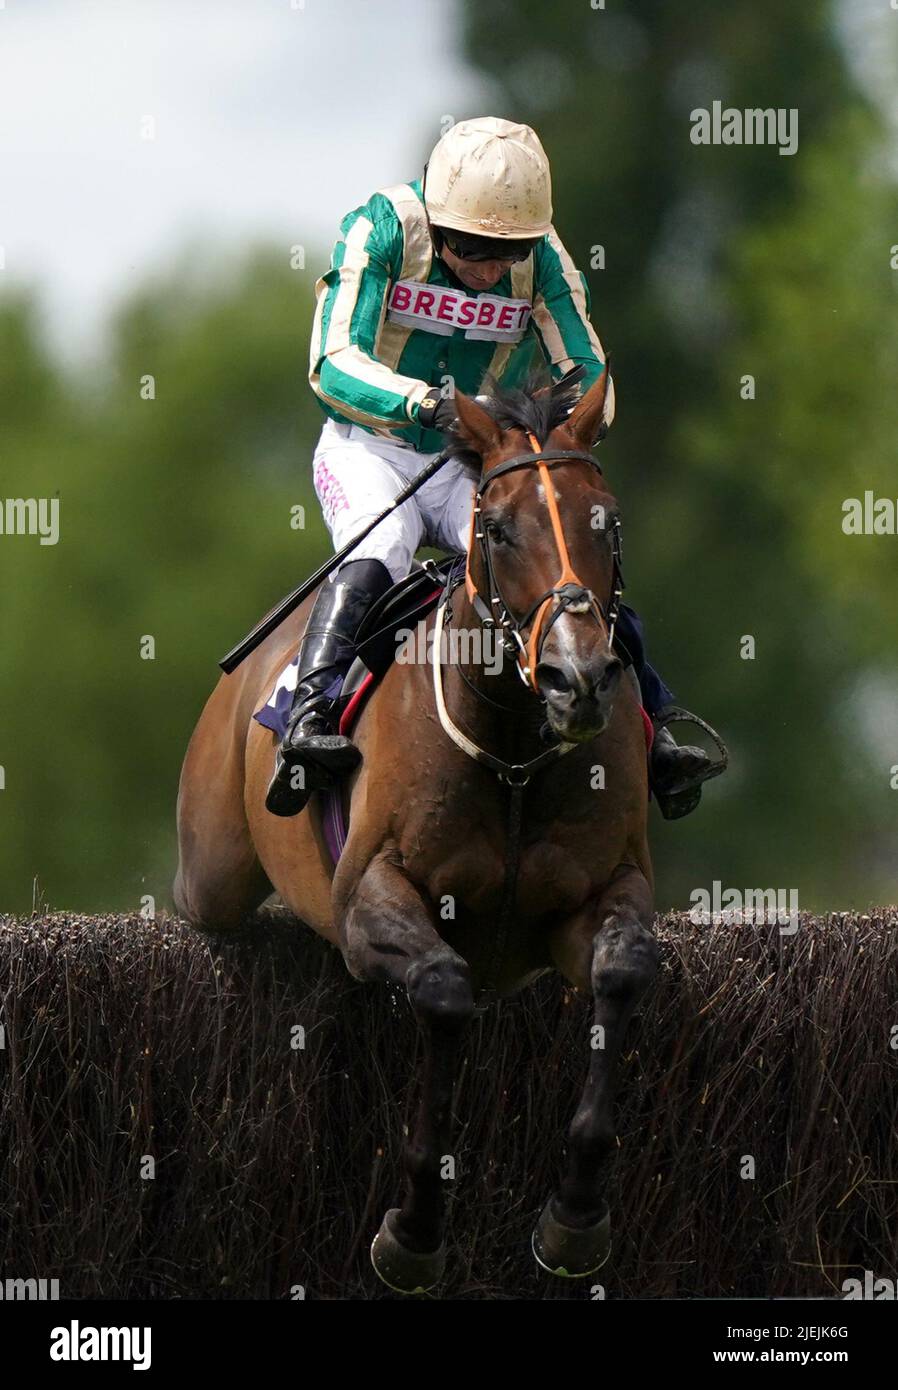 Byzantine Empire ridden by Paddy Brennan wins the Sign Solutions Novices' Limited Handicap Chase at Southwell Racecourse, Nottinghamshire. Picture date: Monday June 27, 2022. Stock Photo